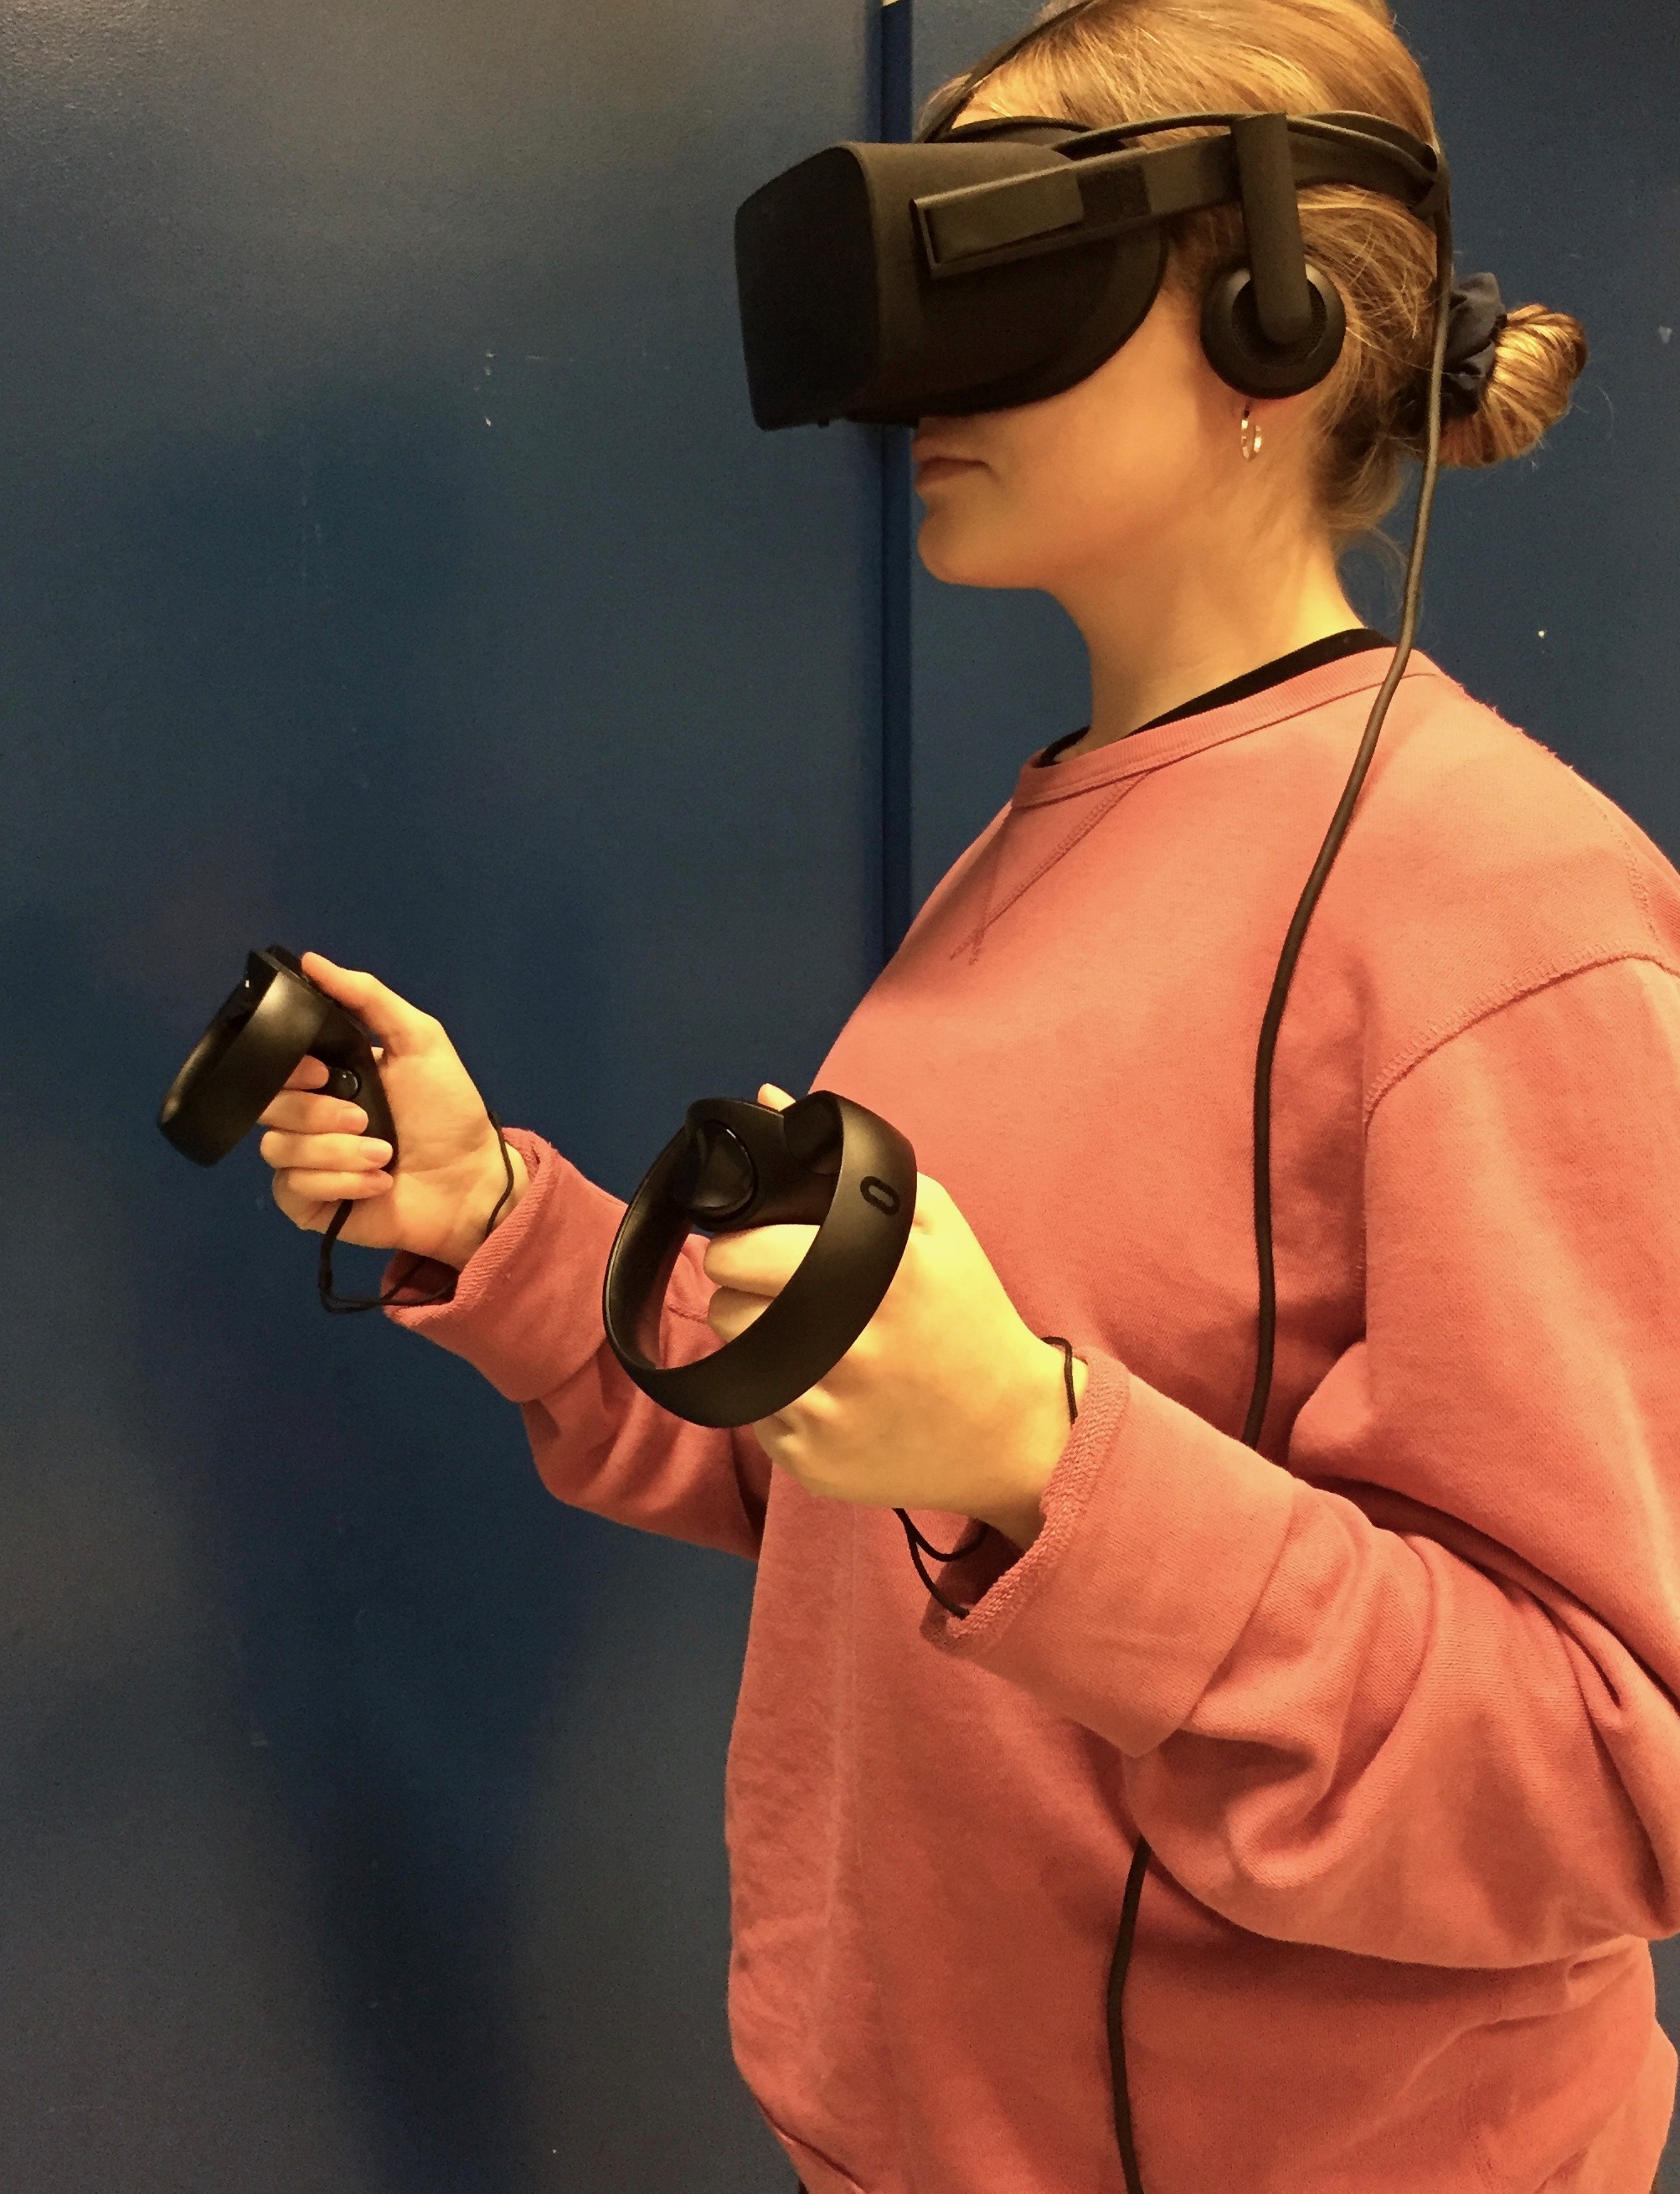 student wearing VR goggles and holding devices in hands